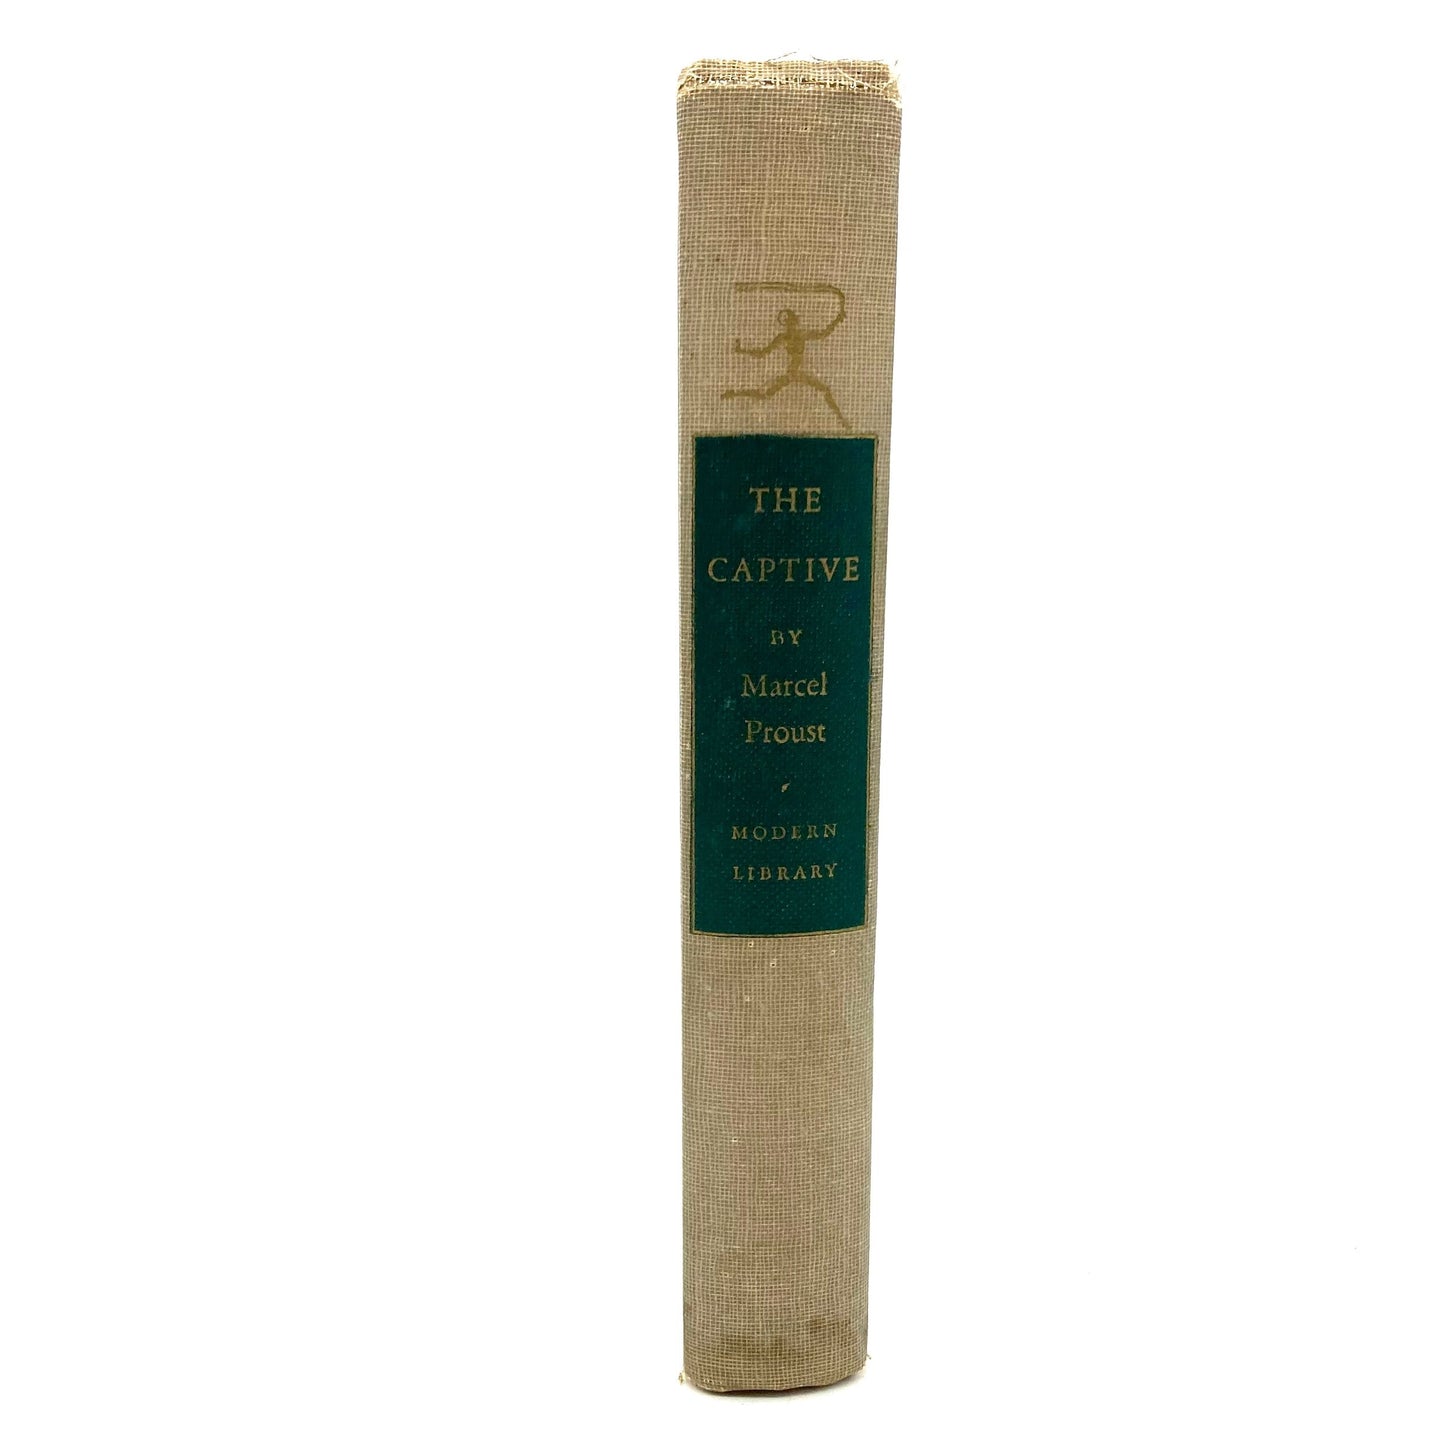 PROUST, Marcel "The Captive" [Modern Library, 1929] - Buzz Bookstore